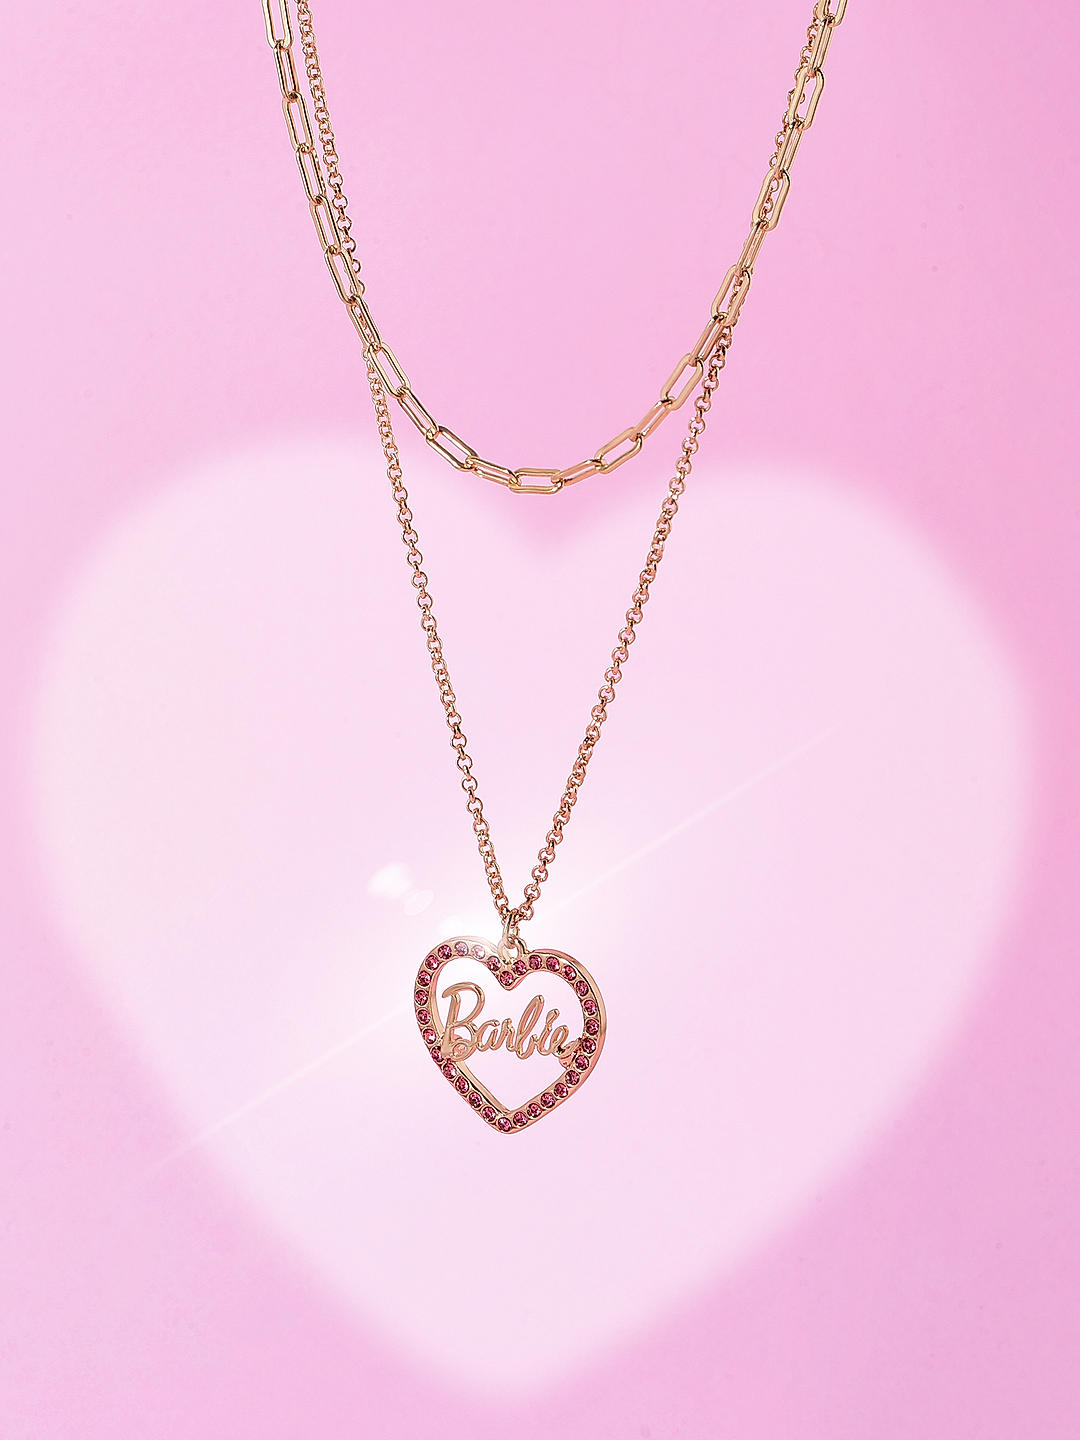 Barbie The Movie Layered Heart Necklace - 991081676208 BarbiePedia